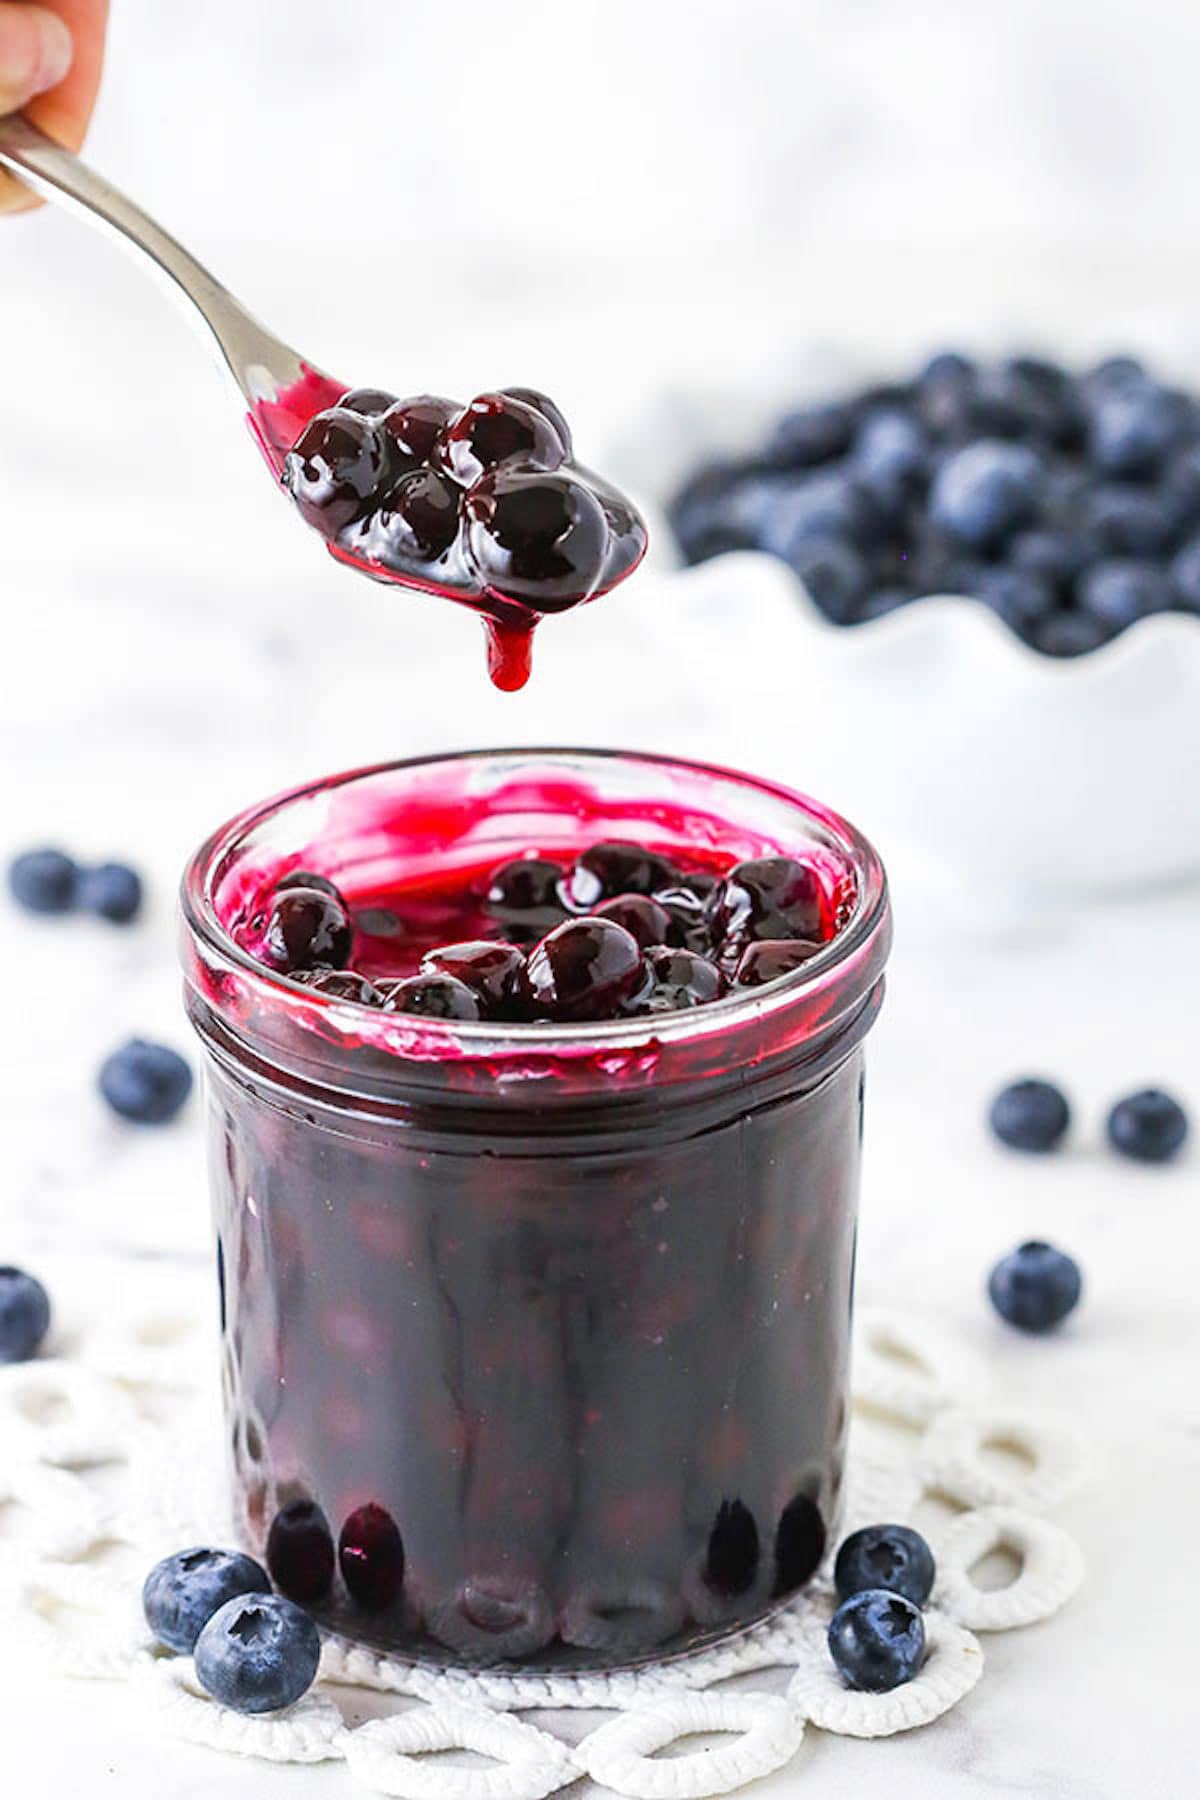 A Spoon Scooping Out Some Homemade Blueberry Sauce From a Jar